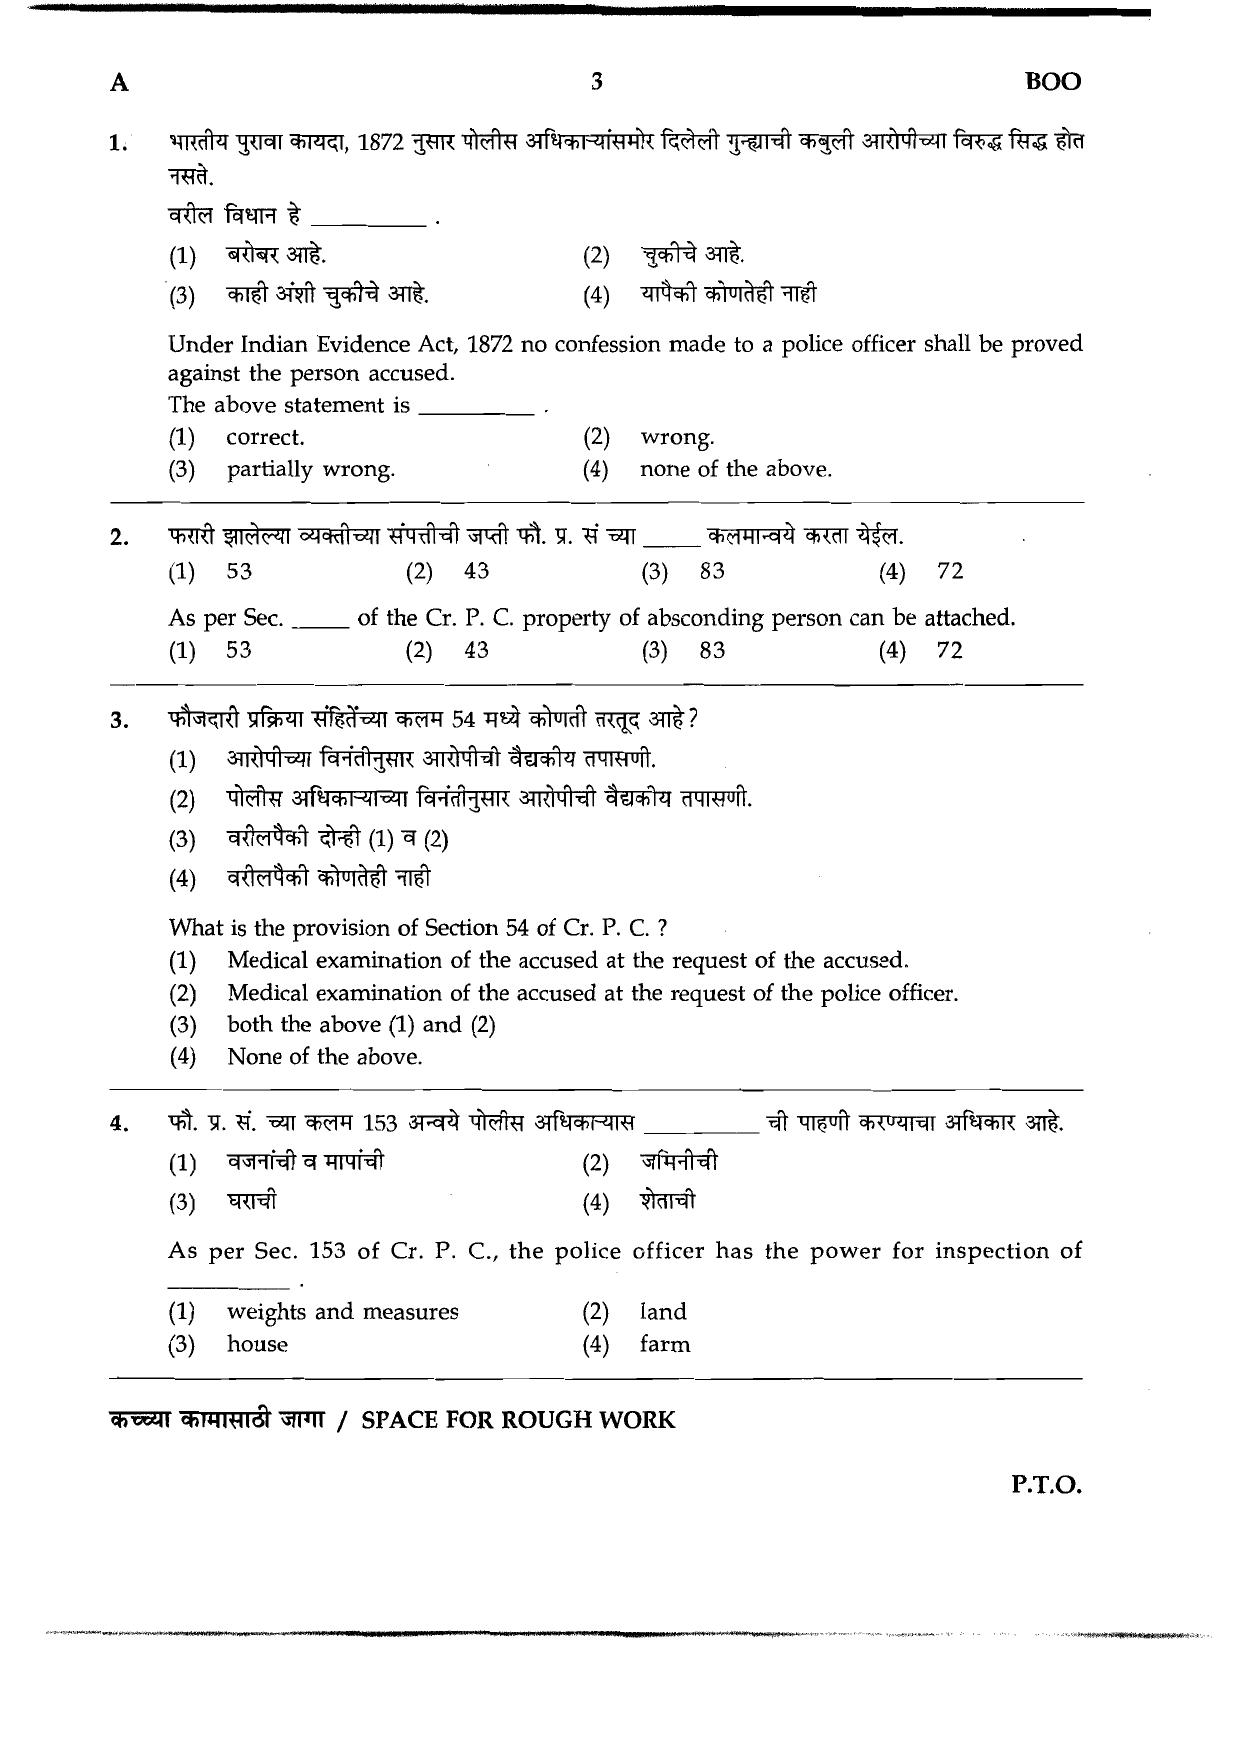 Assam Police LDA, UDA & Other Posts General Knowledge Sample papers - Page 3